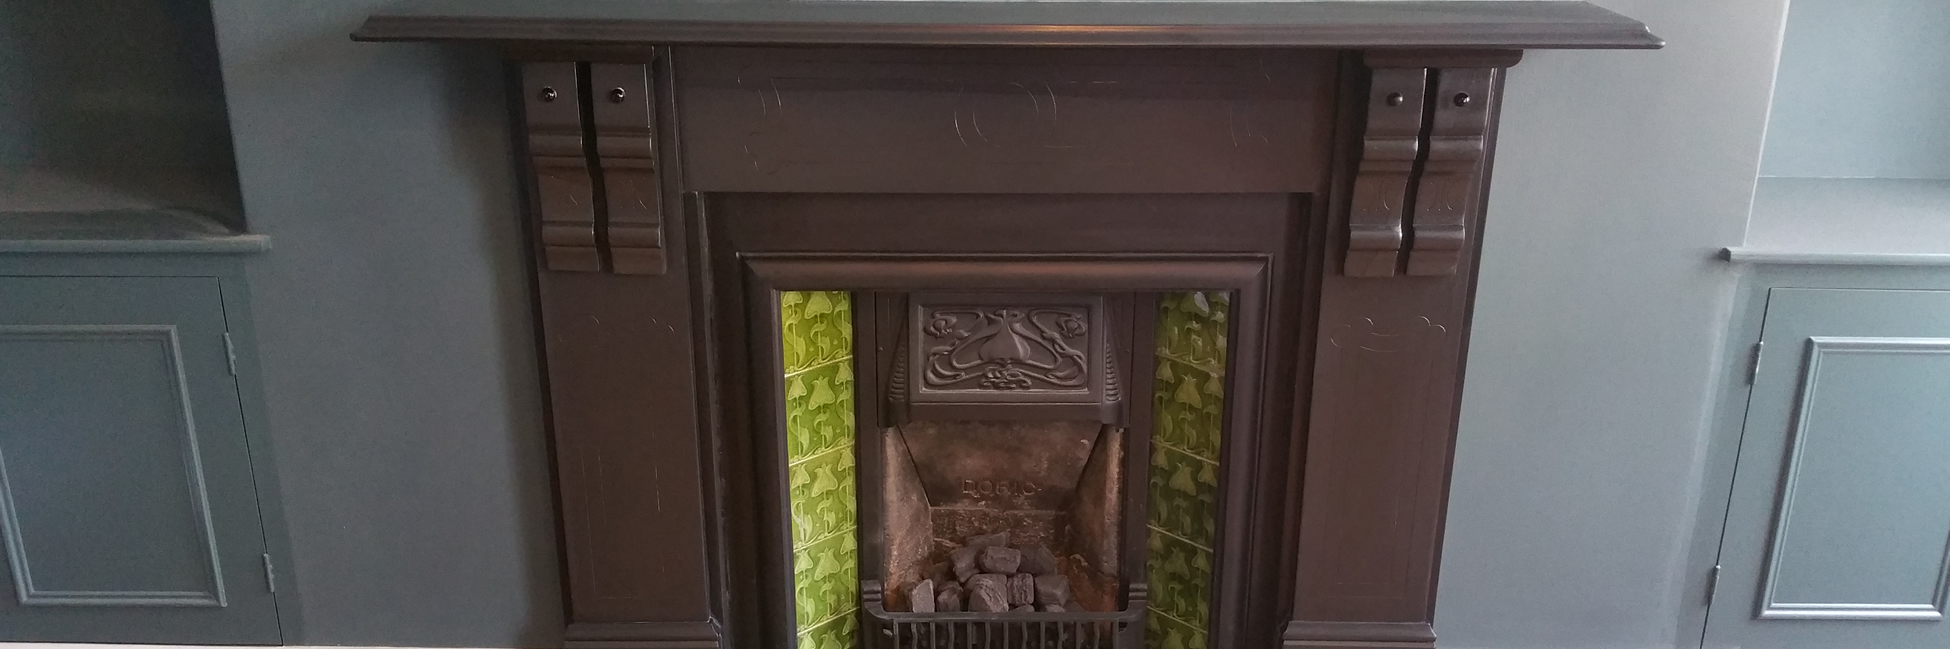 fireplace restoration and cleaning in bath